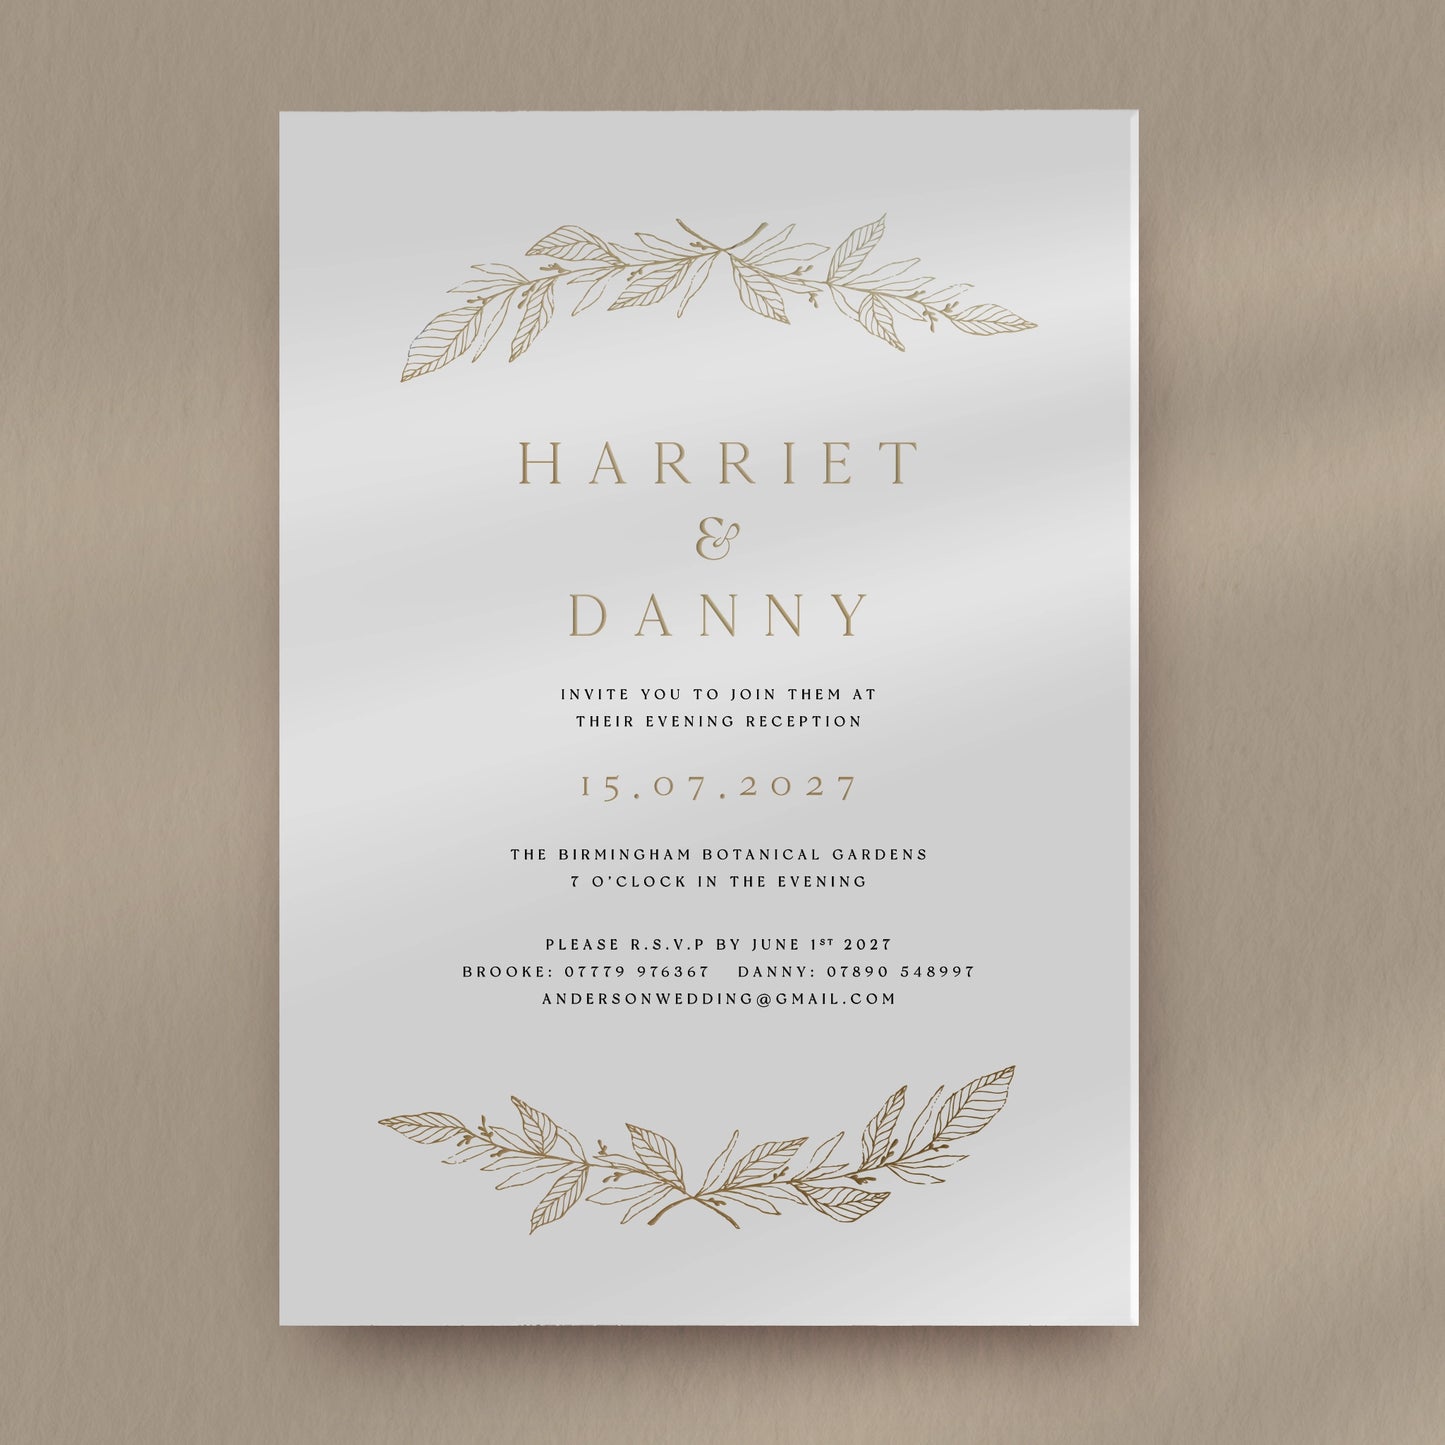 Evening Invitation Sample  Ivy and Gold Wedding Stationery Harriet  